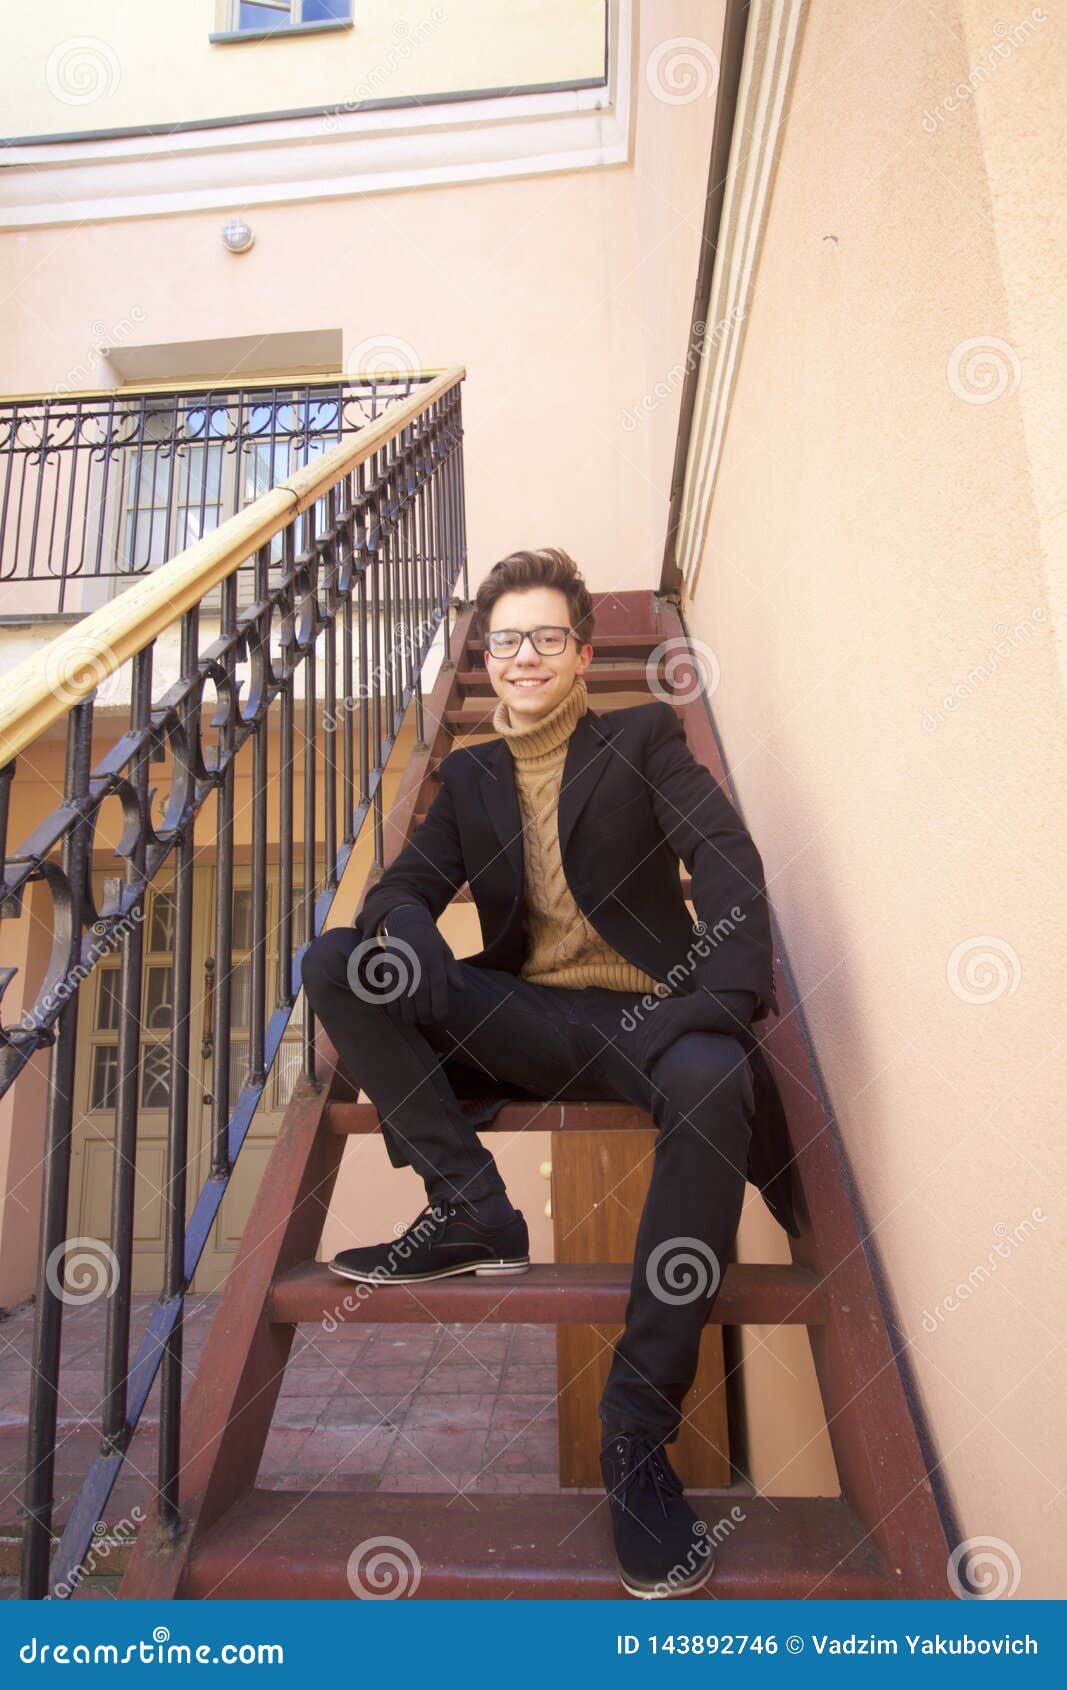 Free: Photo of Woman Sitting On Stairs - nohat.cc